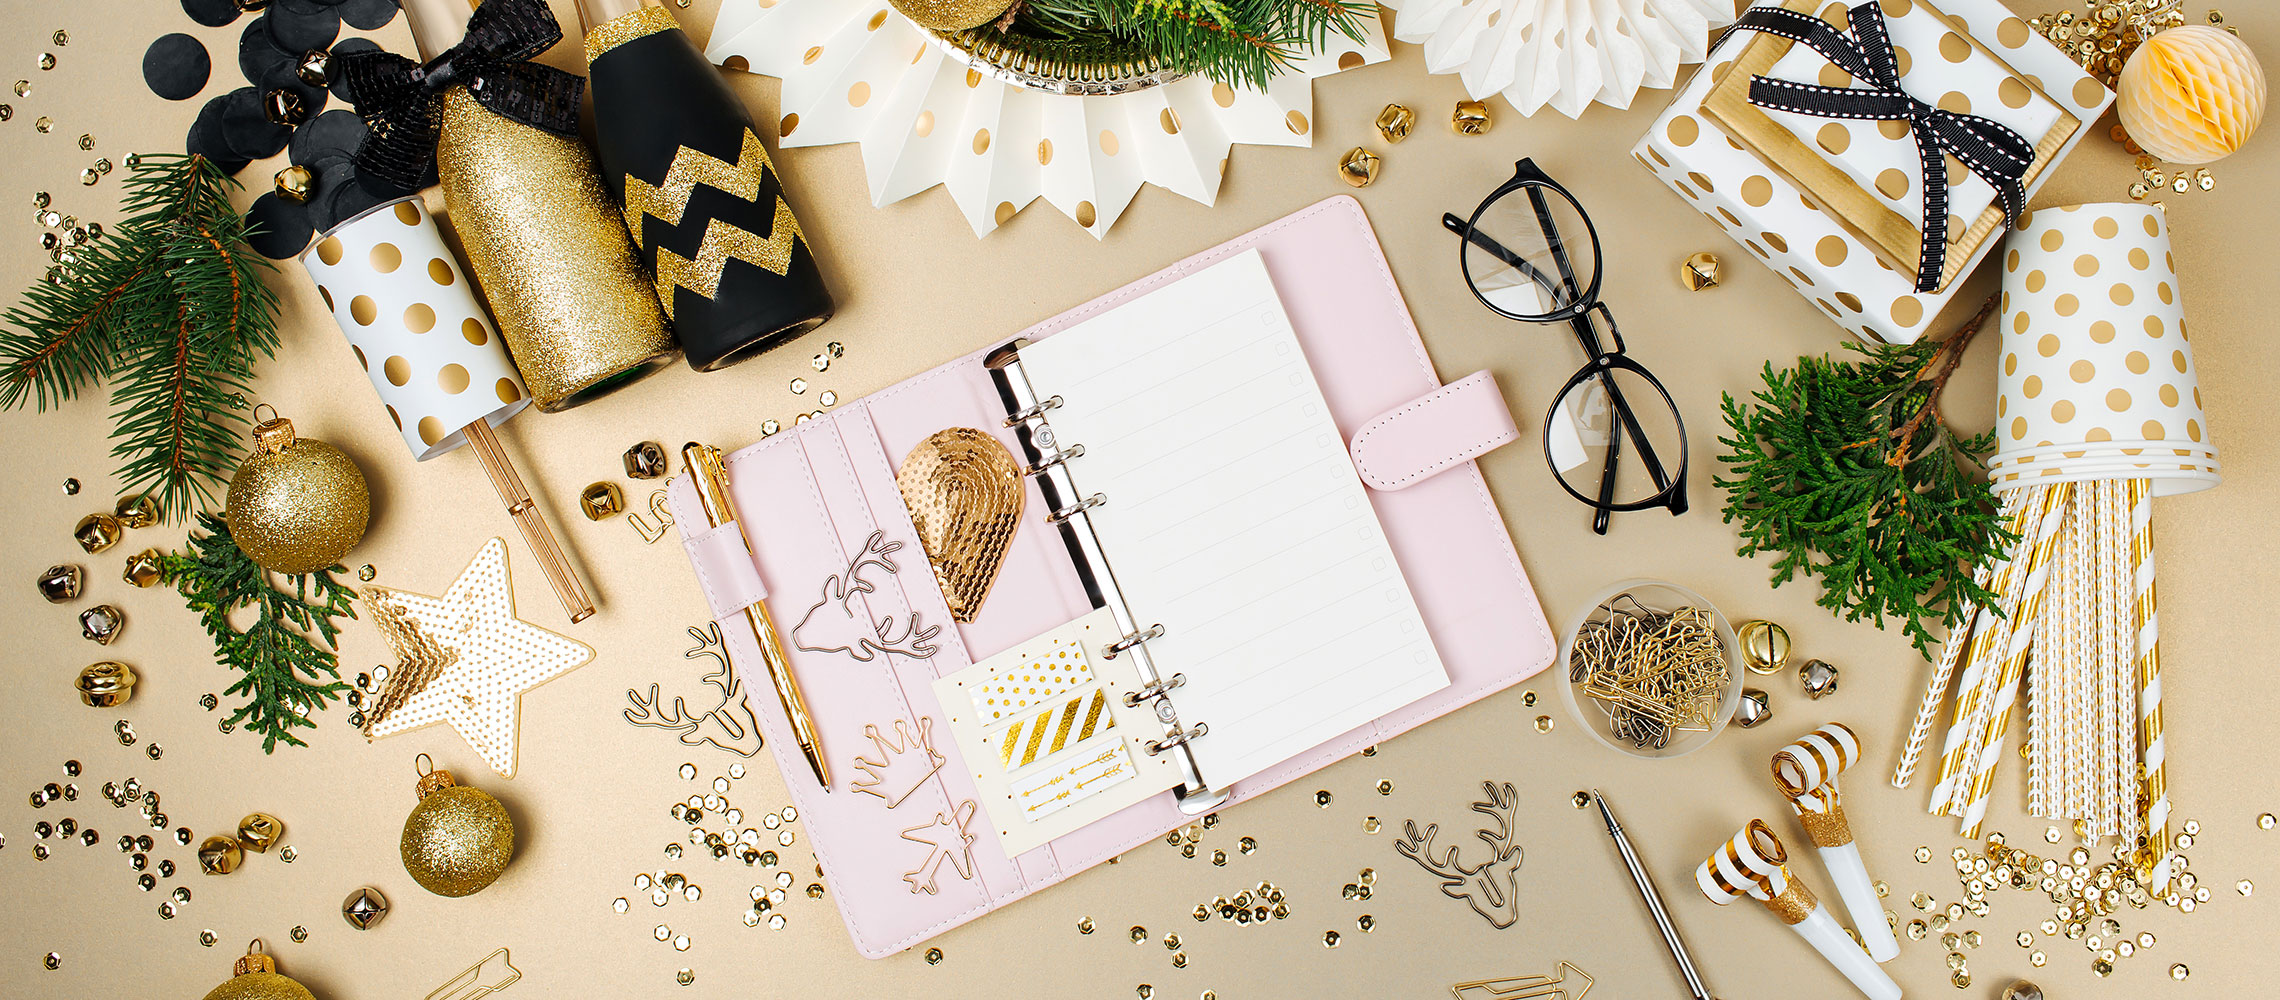 holiday planner on desk with festive accessories